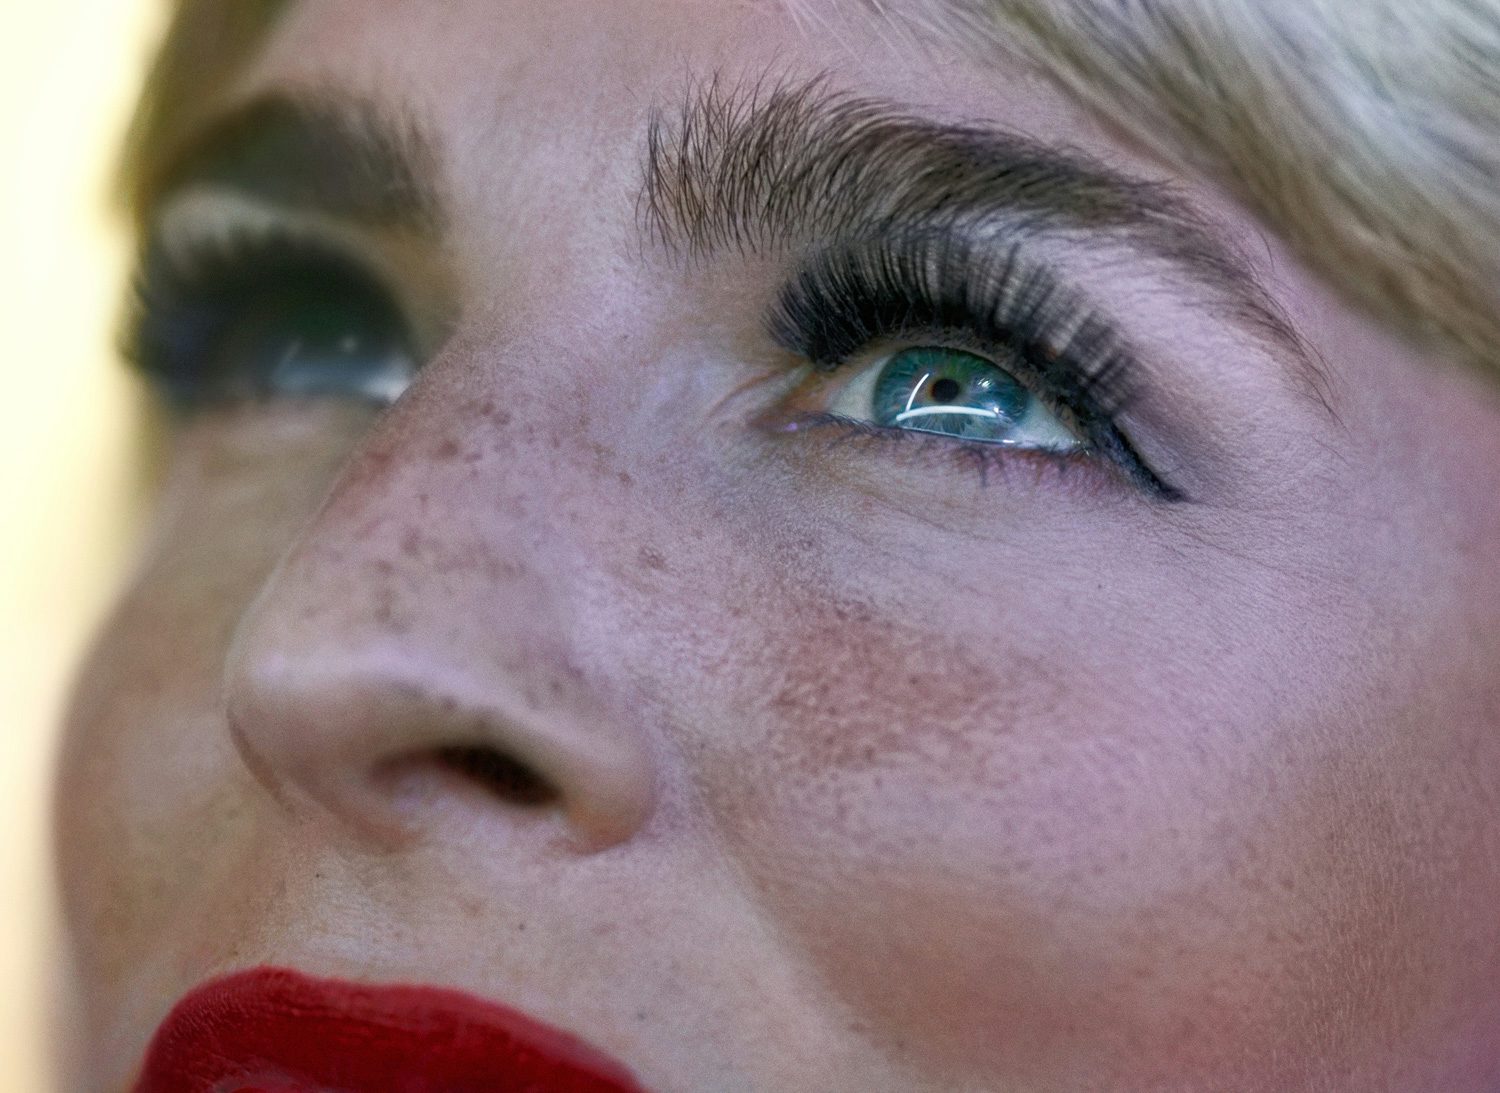 Image by Alex Prager shows a close crop photograph of a person's face wearing red lipstick and gazing upwards